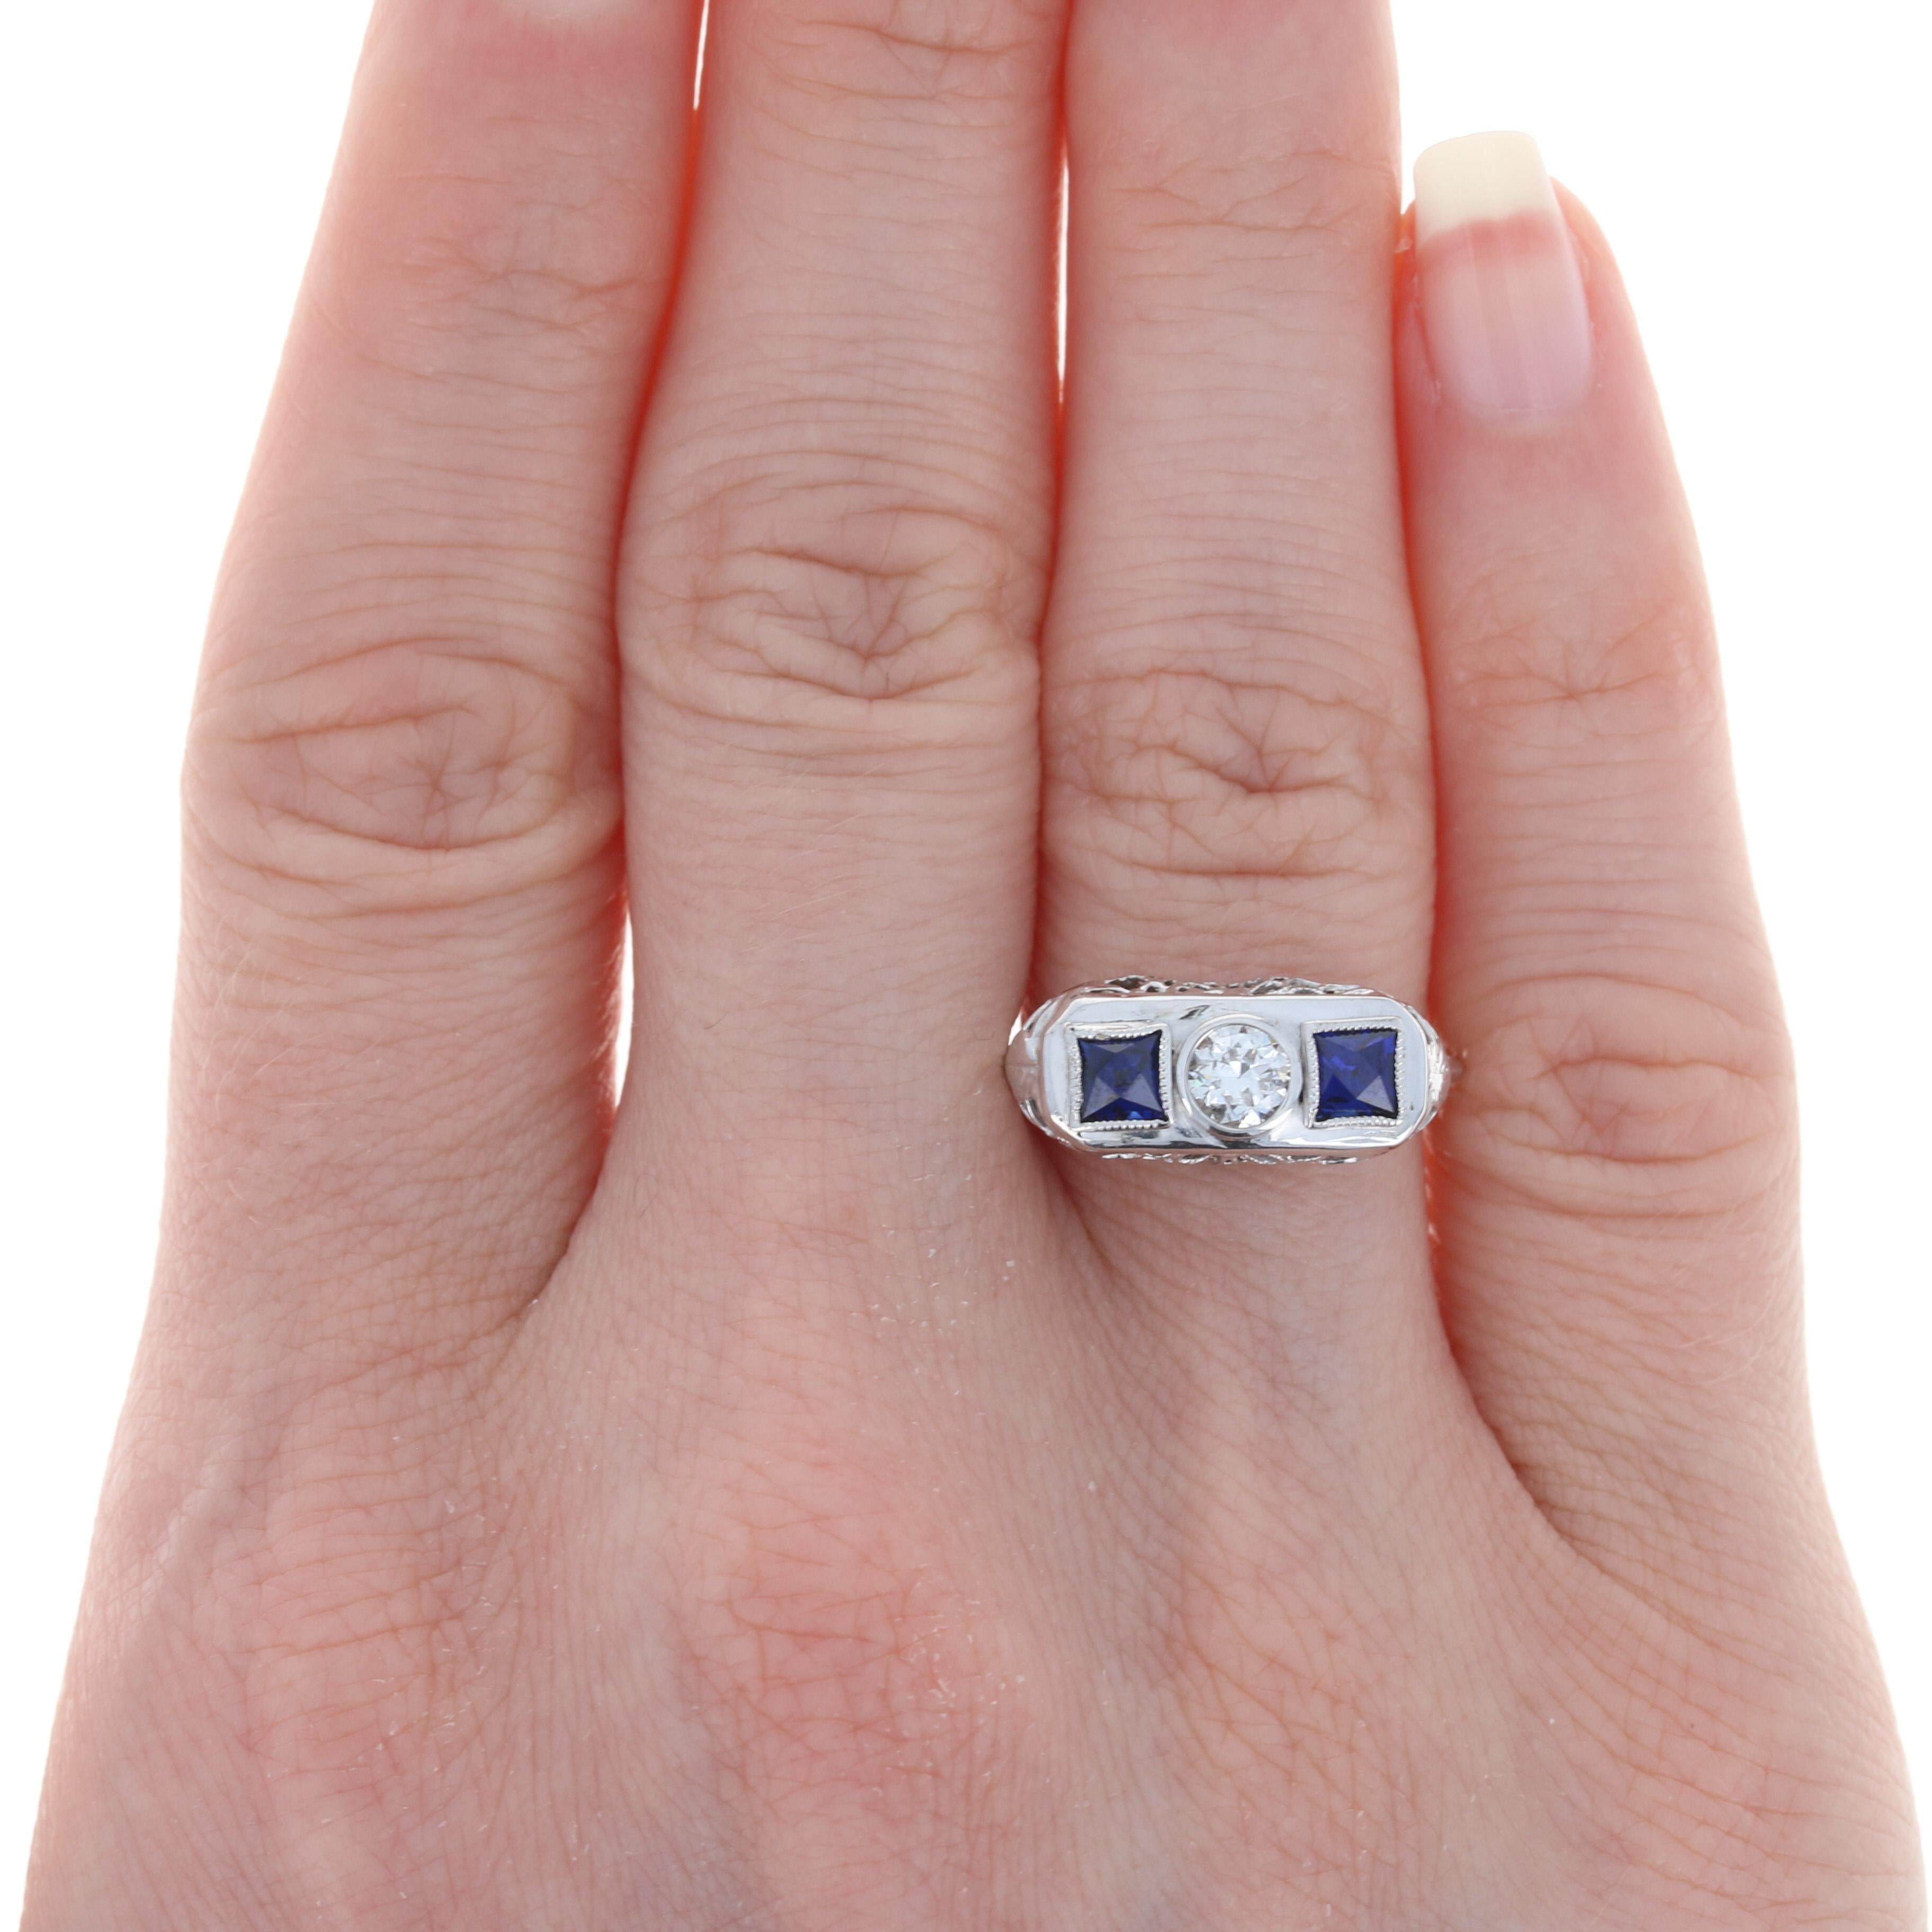 Sheer Art Deco allure! Crafted in the 1920s - 1930s, this luxurious 18k white gold vintage ring showcases a sparkling diamond solitaire set between two synthetic blue sapphires which are highlighted by ornate filigree and milgrain accents to create